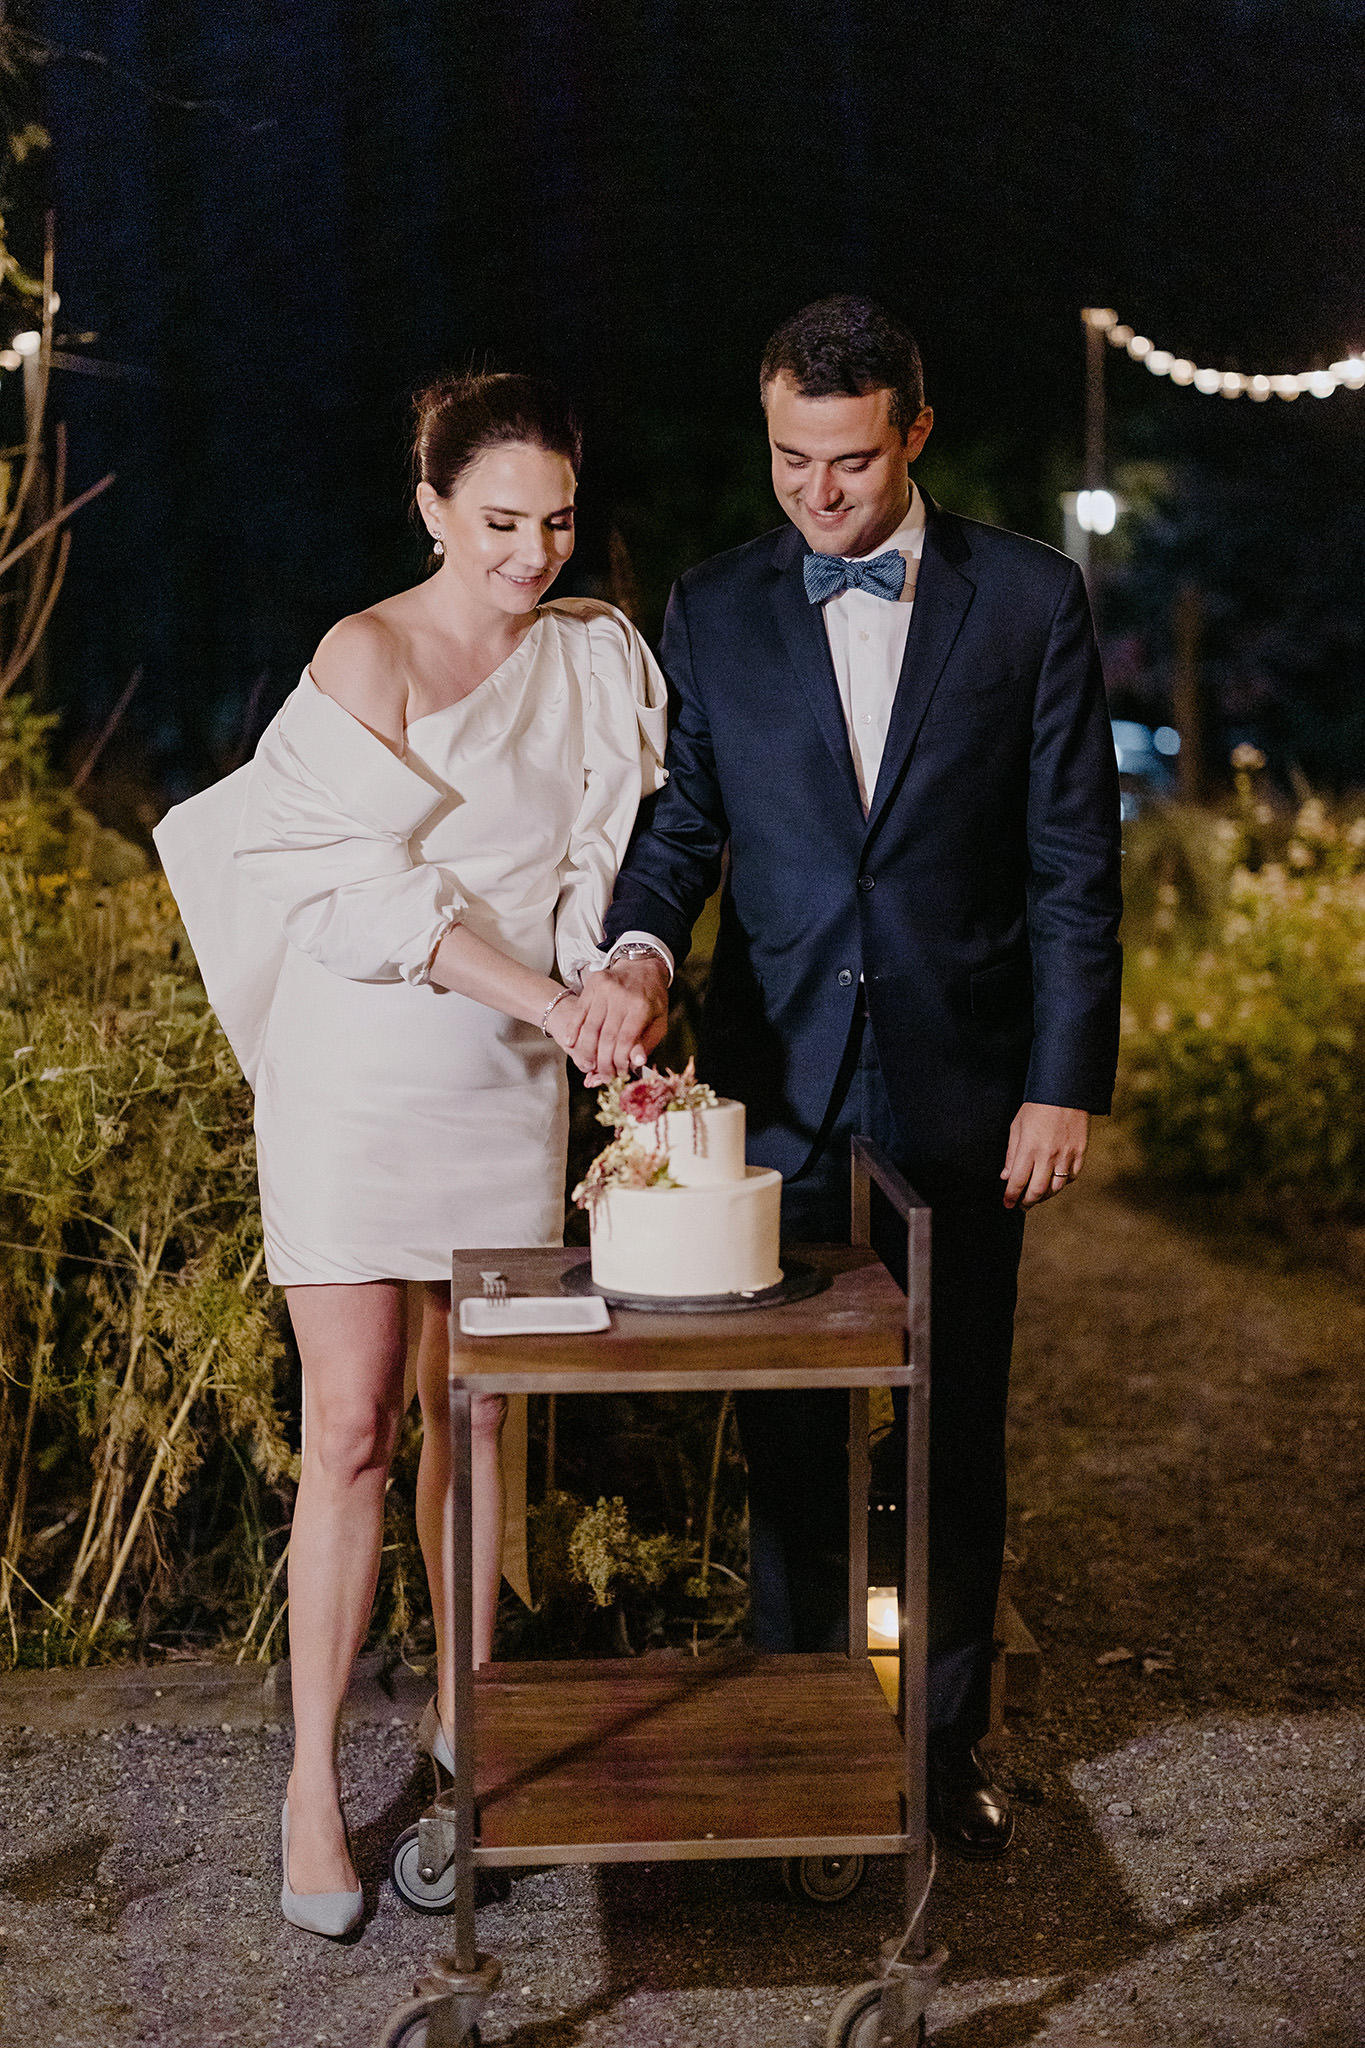 Bride and groom cut their cake at night at Blue Hill at Stone Barns garden.